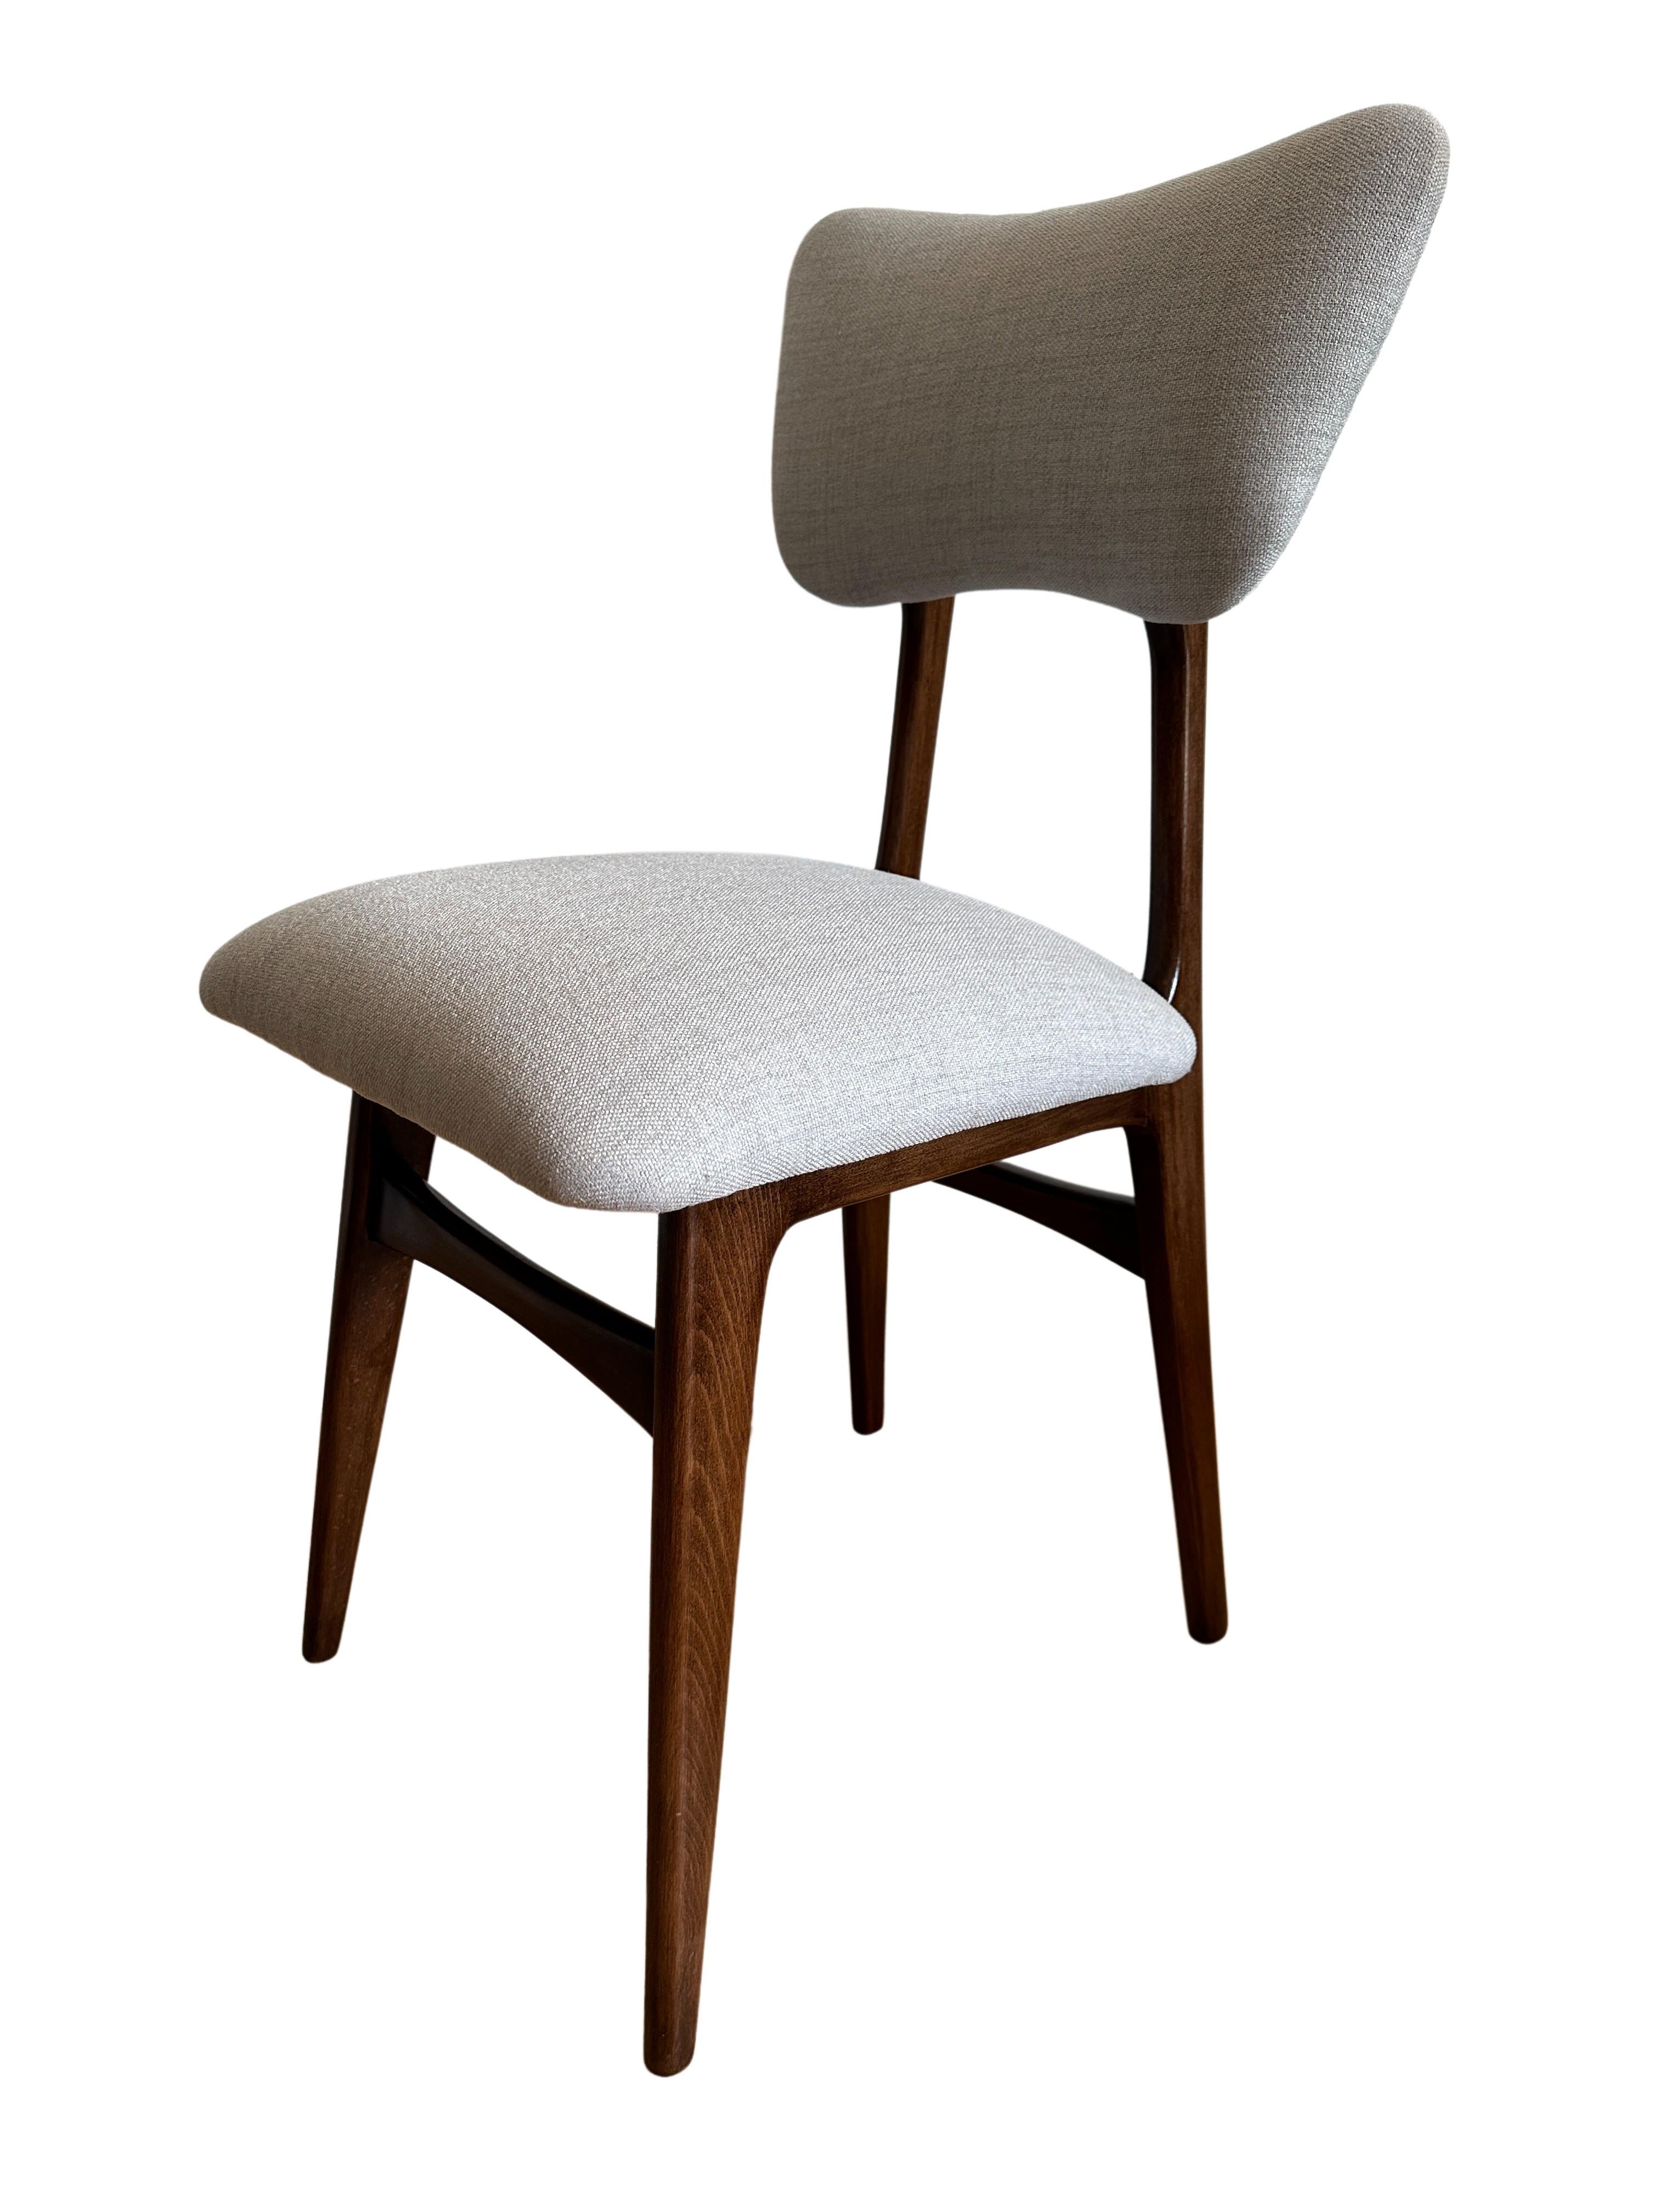 Mid Century Wooden Dining Chair in Grey Upholstery, Poland, 1960s For Sale 5